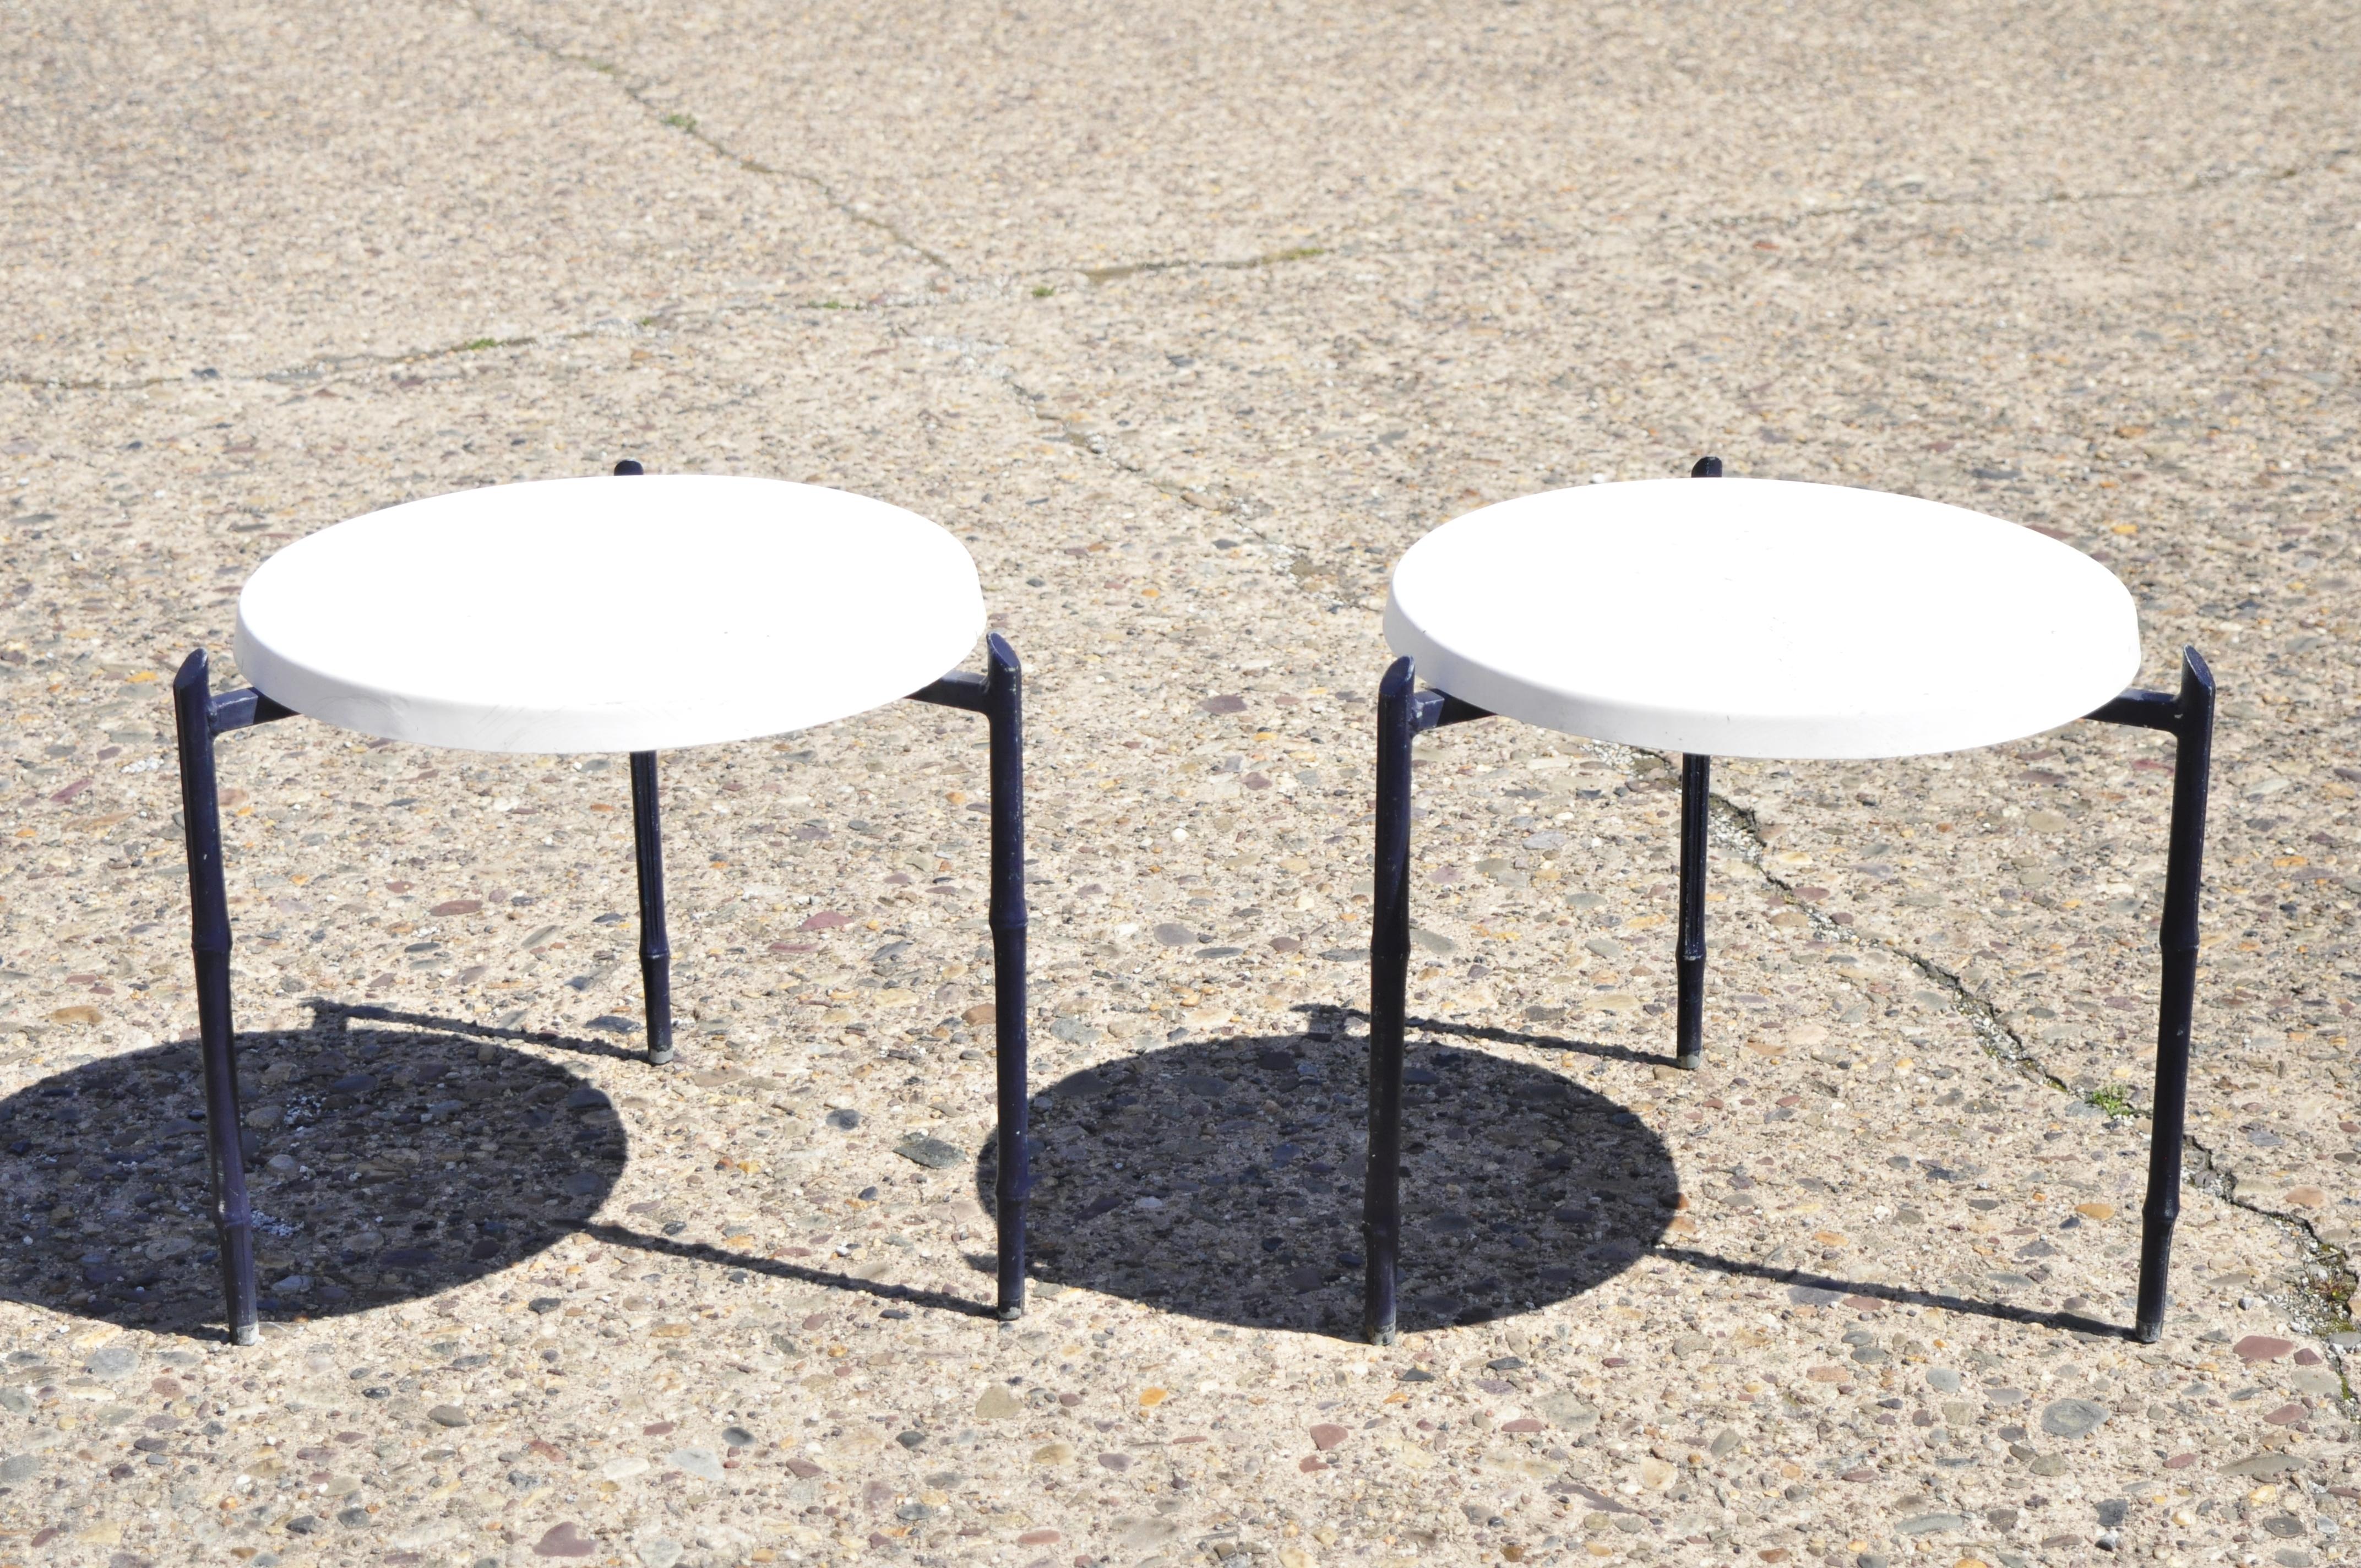 Vintage Faux Bamboo Aluminum Pool Patio Side Tables with Fiberglass Tops - a Pair. Item features a round fiberglass tops, cast aluminum faux bamboo design tripod bases, very nice vintage pair, great style and form. Circa Mid to Late 20th Century.